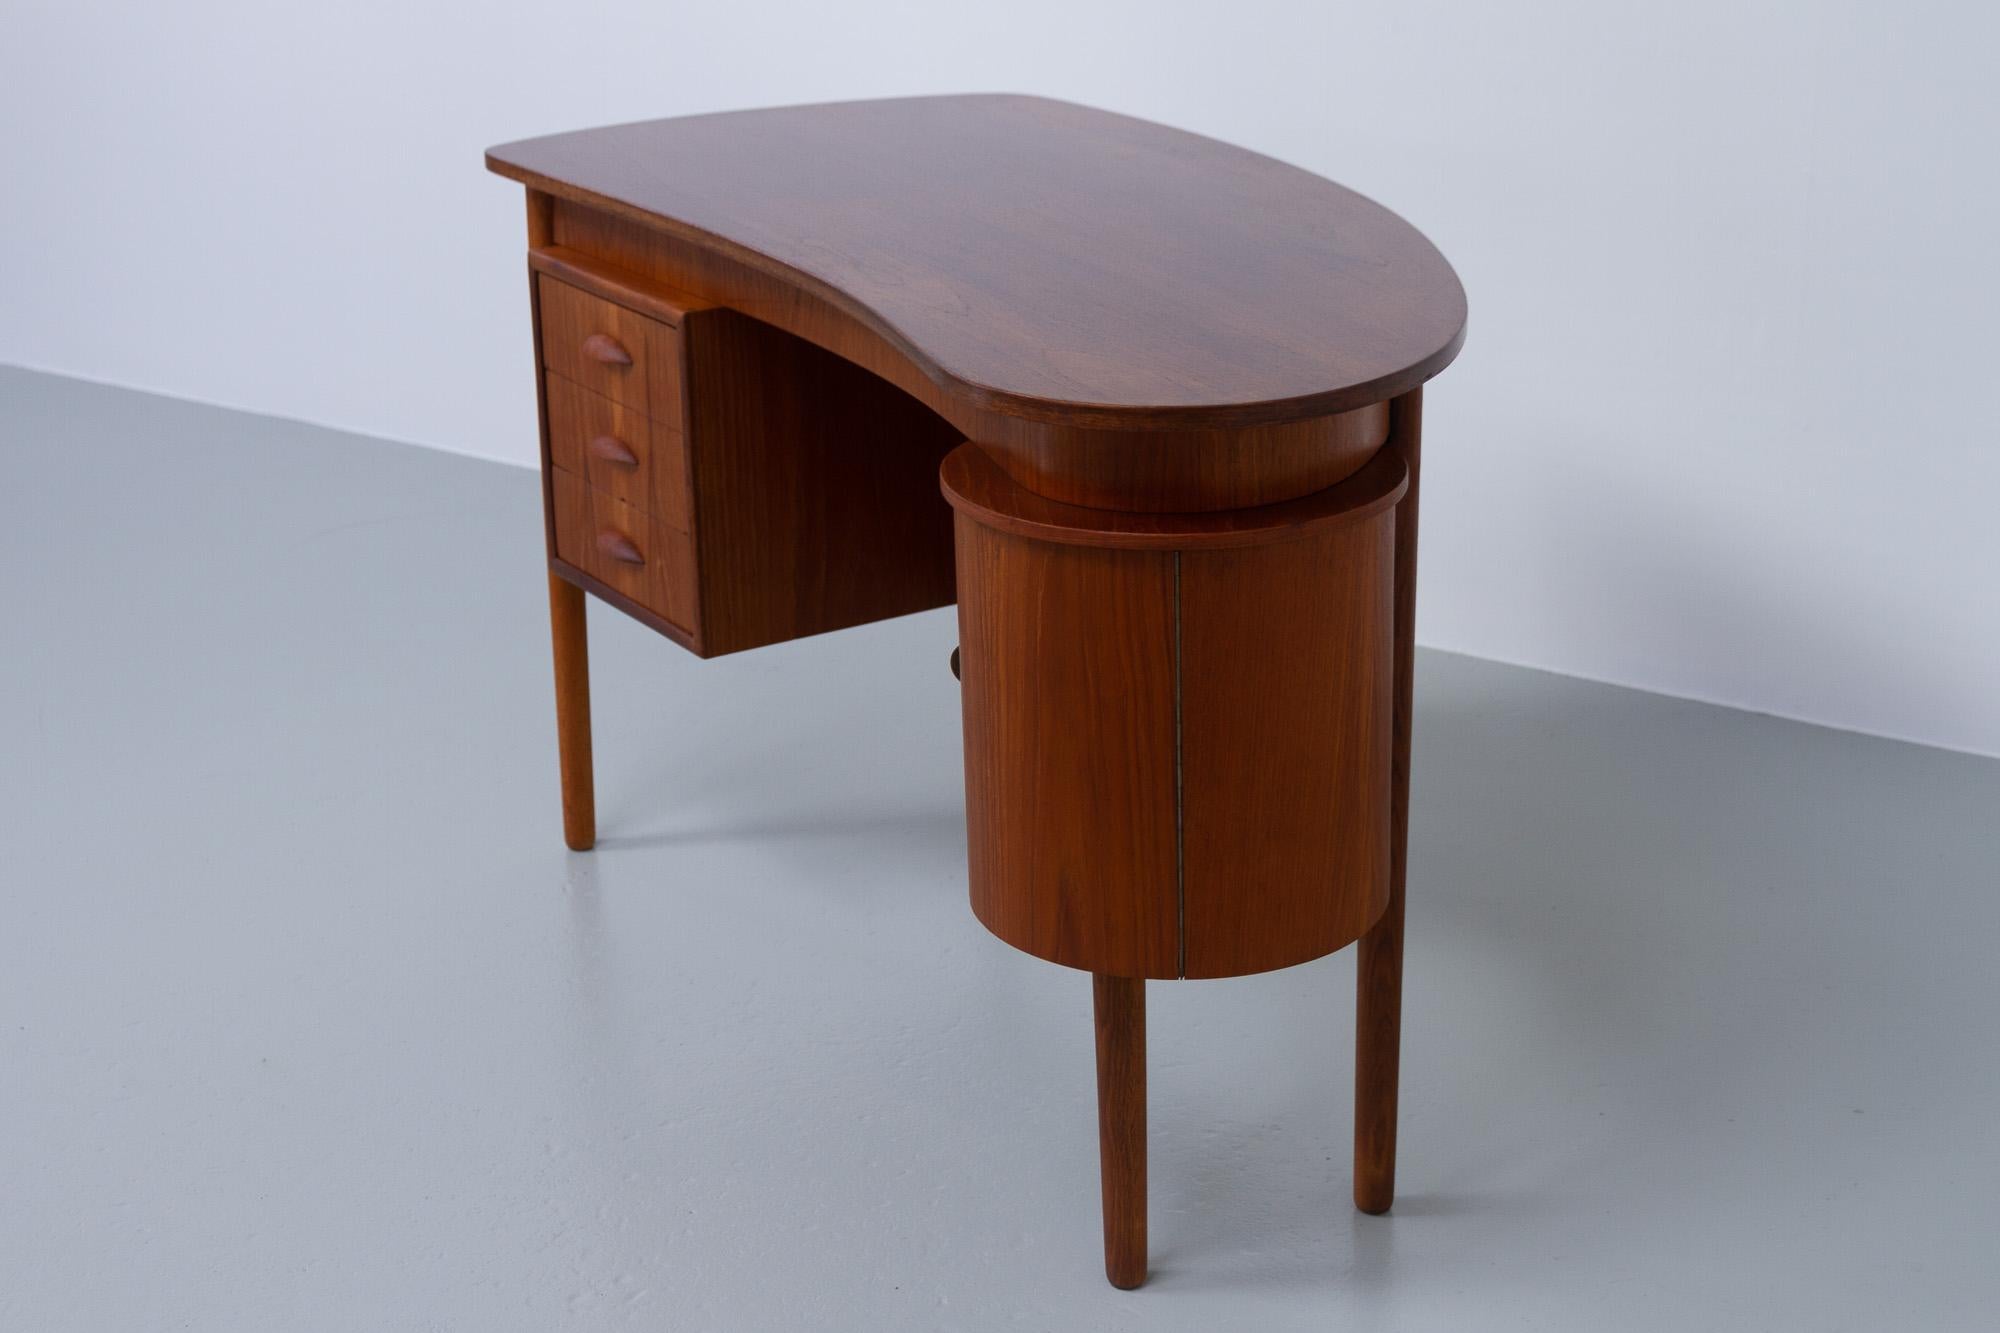 Vintage Danish teak kidney desk, 1950s.

Danish Mid-Century Modern freestanding organically shaped writing desk made in Denmark in the 1950s. Kidney shaped table top in teak veneer. Drawer section with three drawers with sculpted pulls in solid